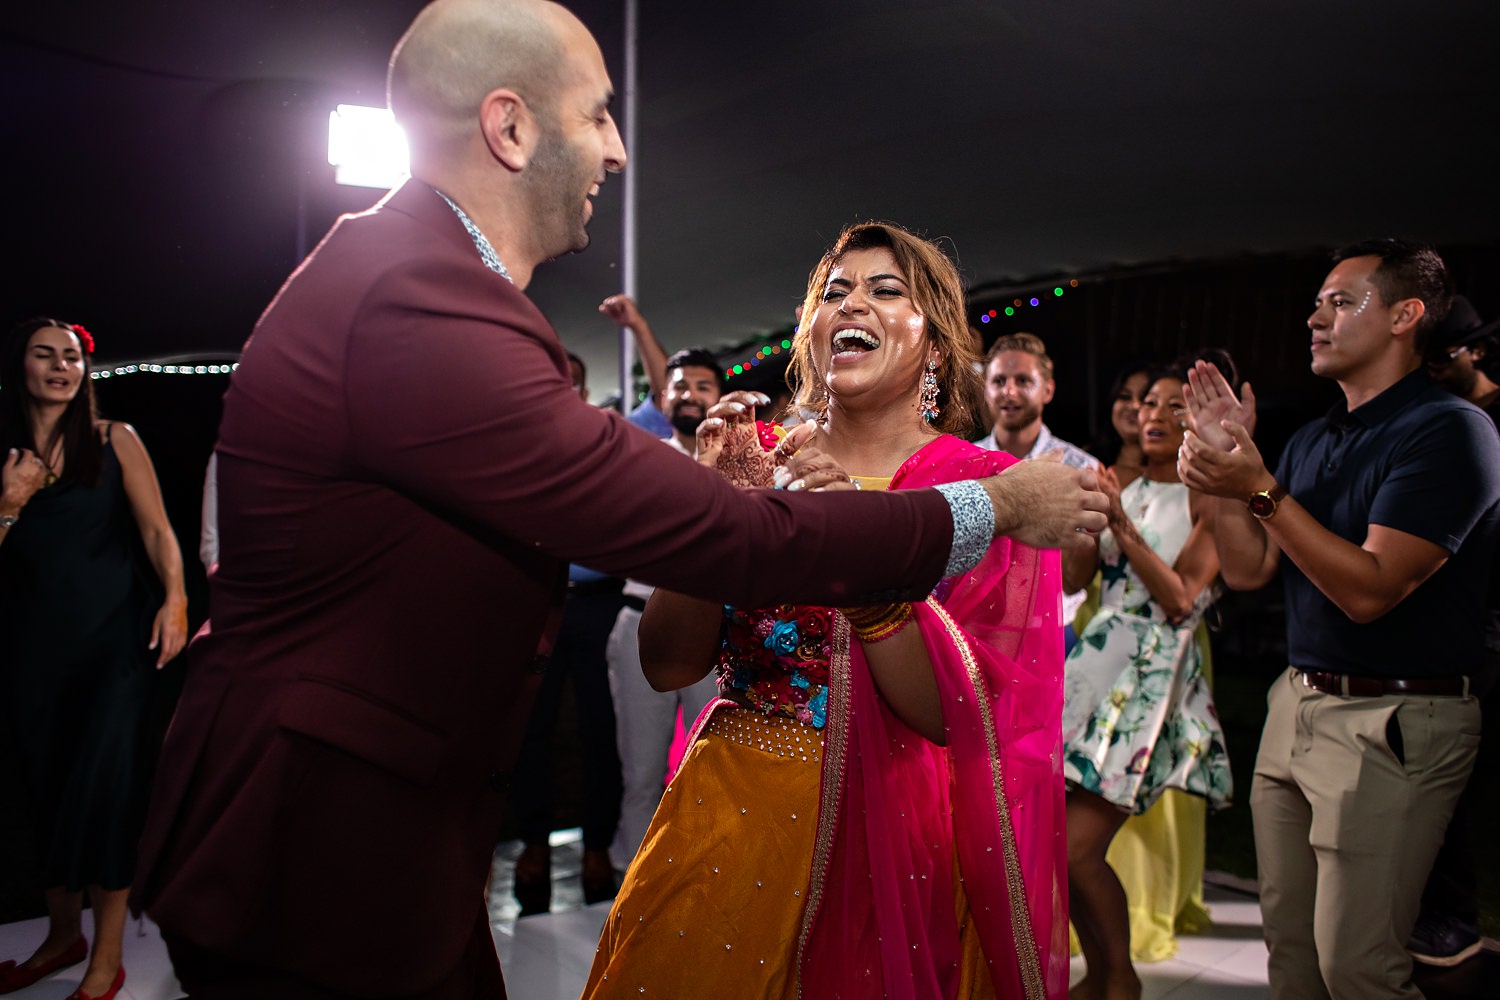 The bride and groom laugh in the middle of the wedding dancefloor dressed in traditional wedding attire and a maroon and gold embellished Sari